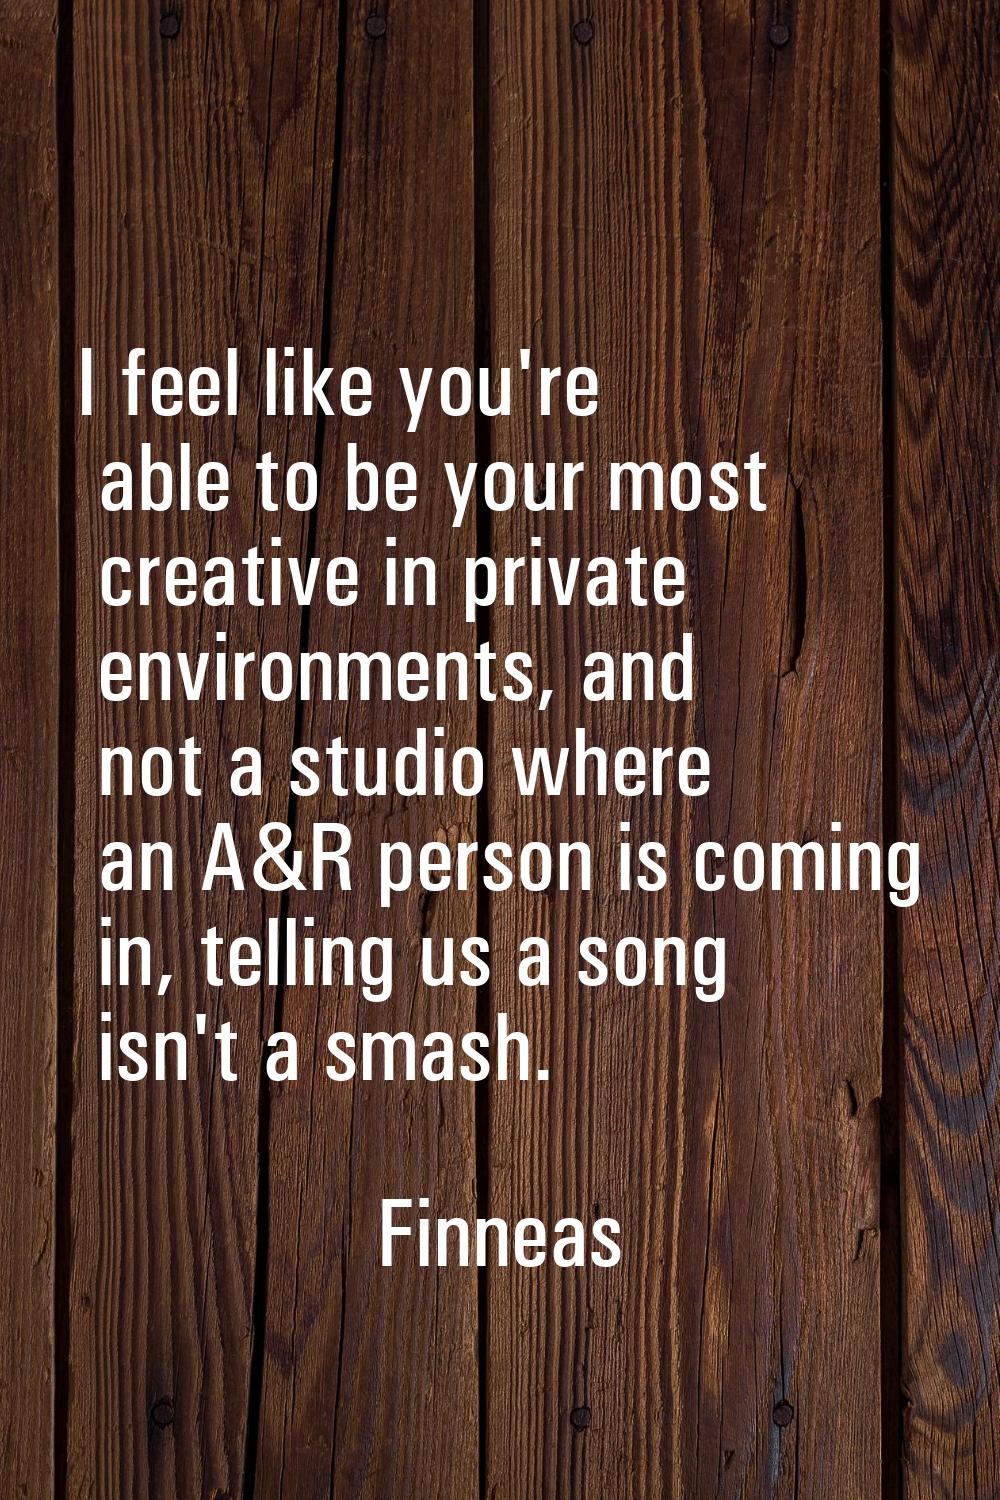 I feel like you're able to be your most creative in private environments, and not a studio where an